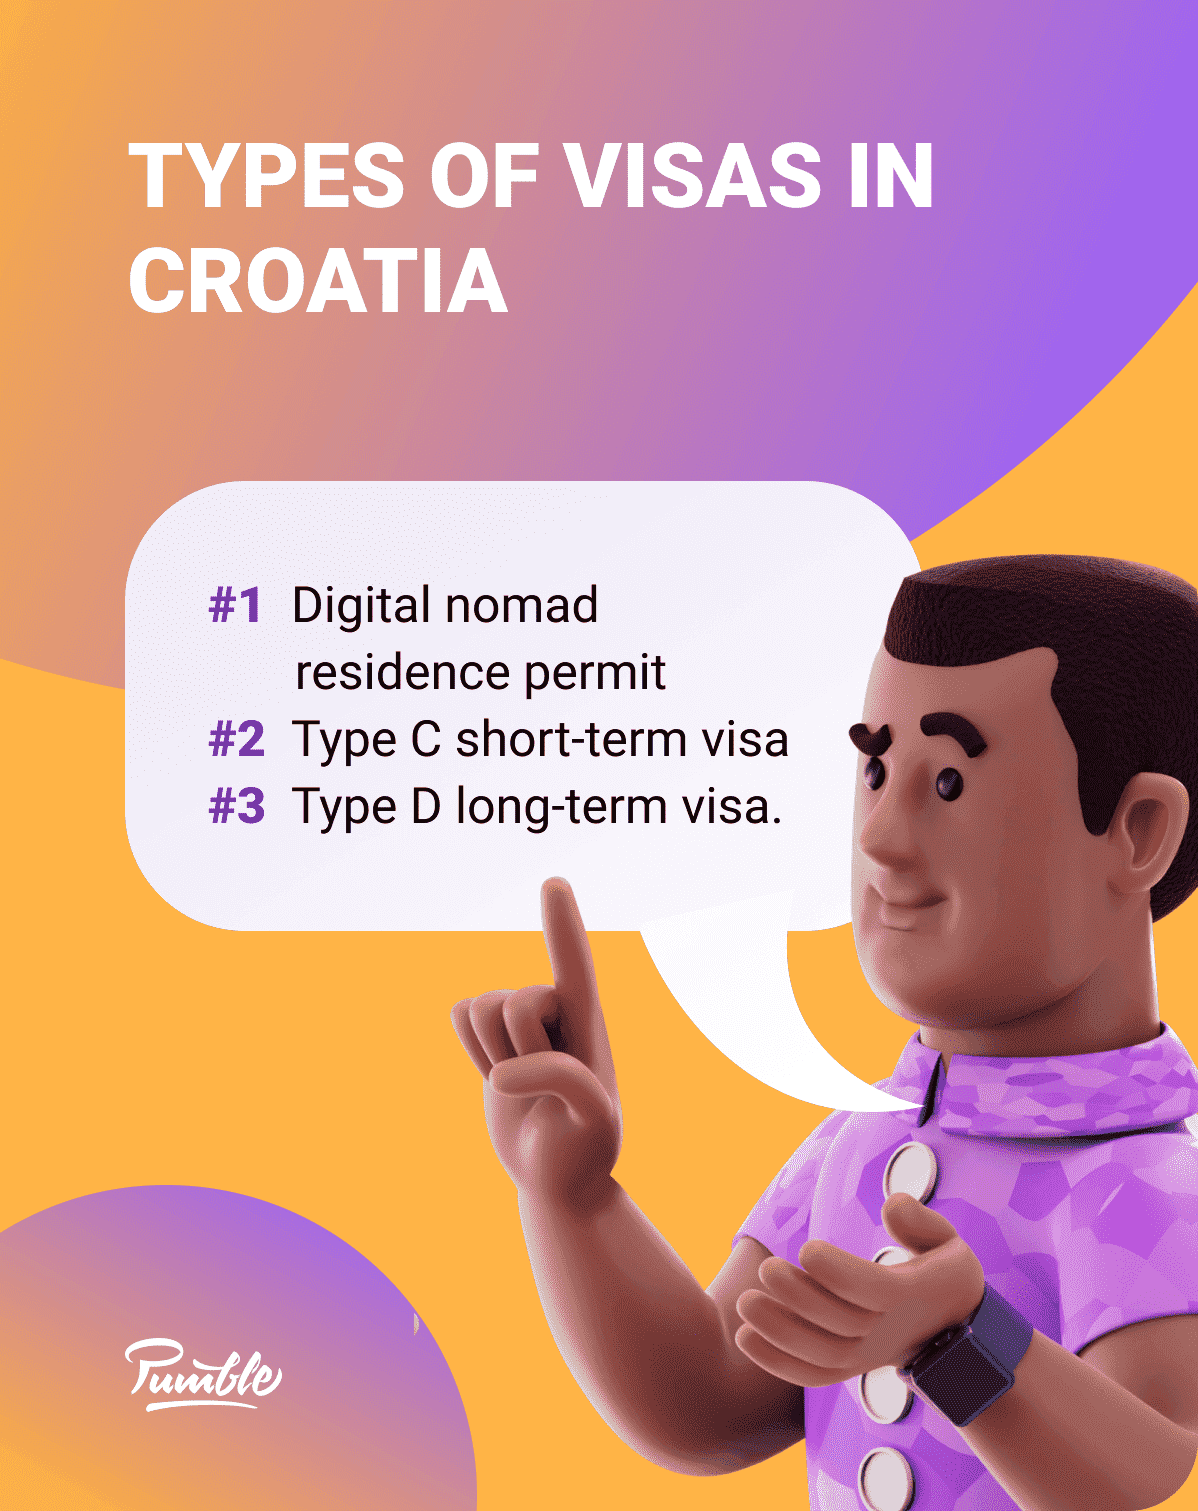 There are three different visas that Croatia offers
